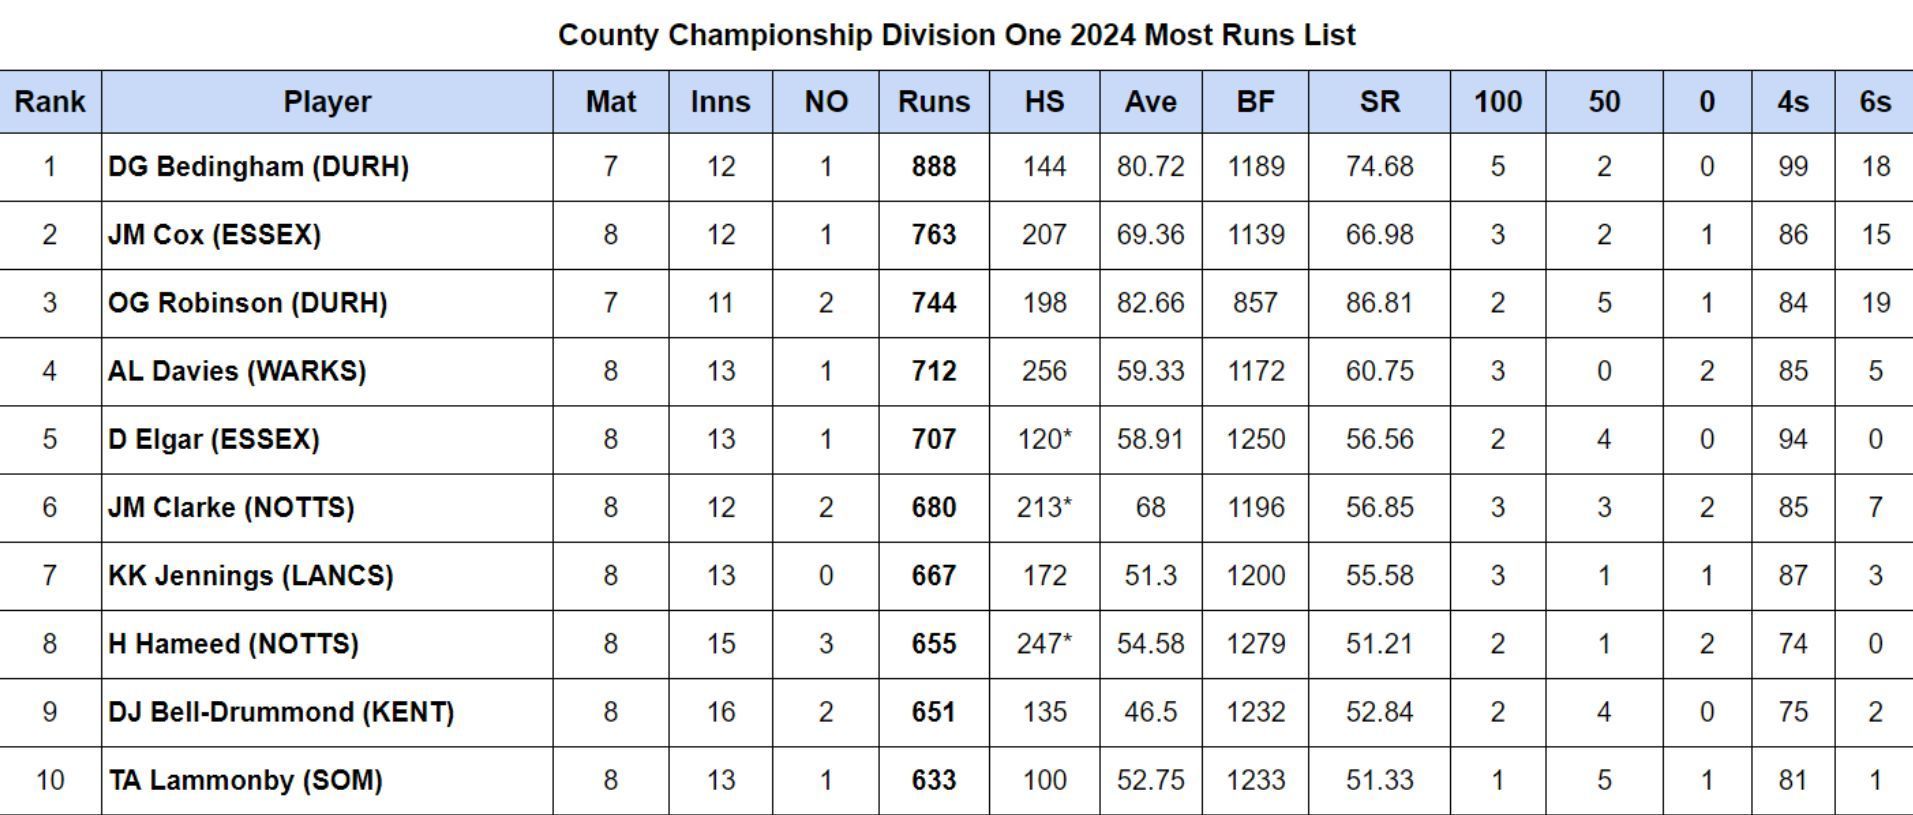 County Championship Division One 2024 Most Runs List